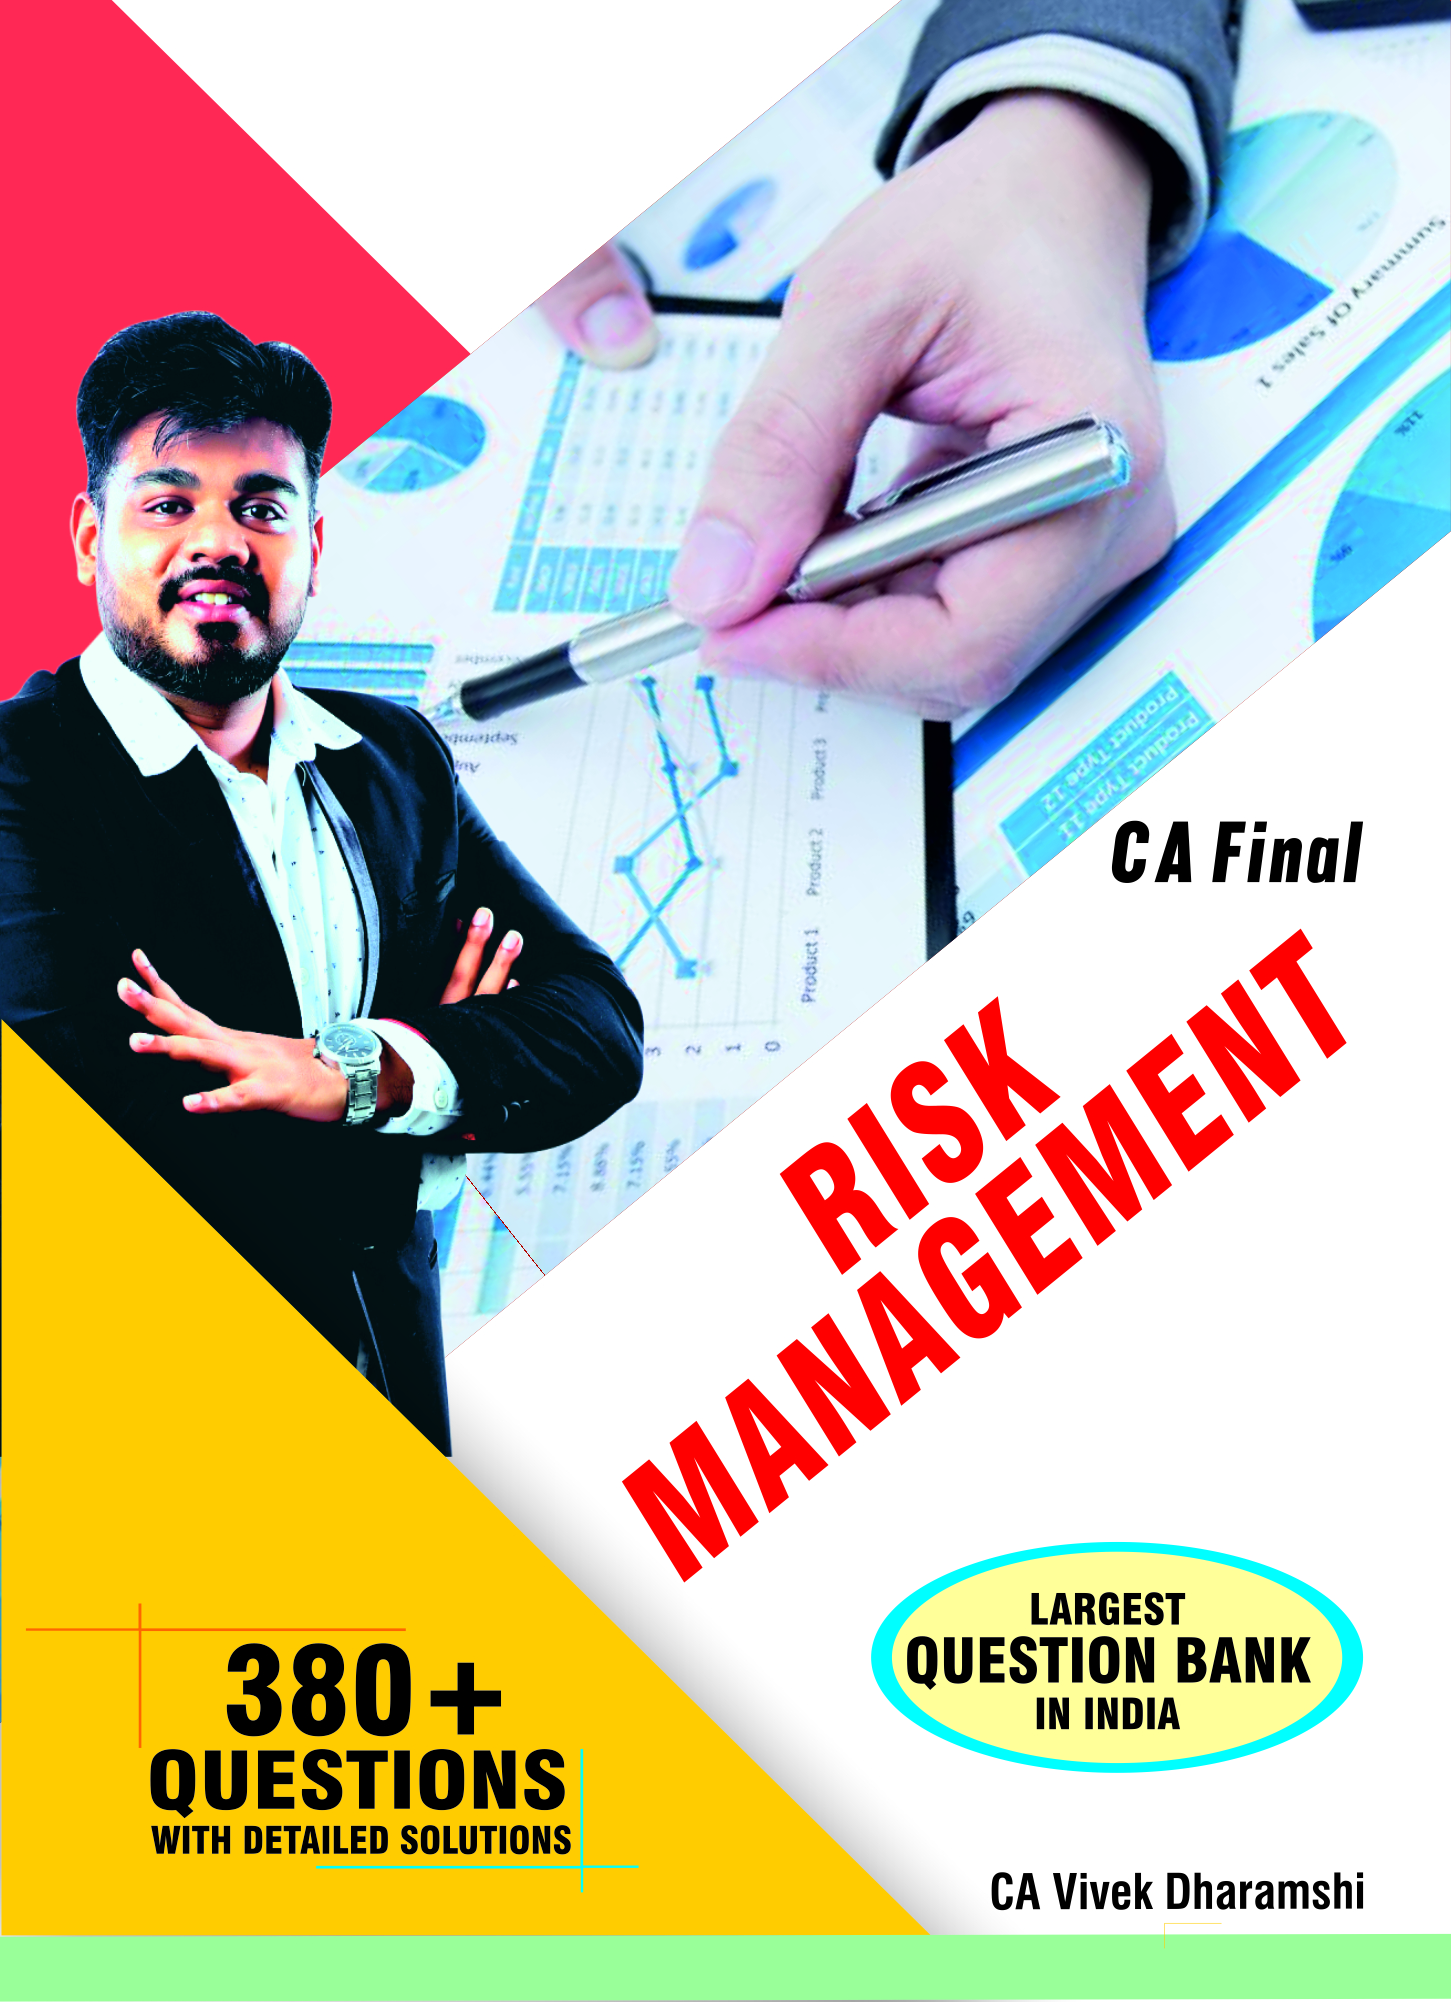 CA_Final_Risk_Management_|_Largest_Question_Bank_in_India_|_380_Questions_with_Detailed_Solutions